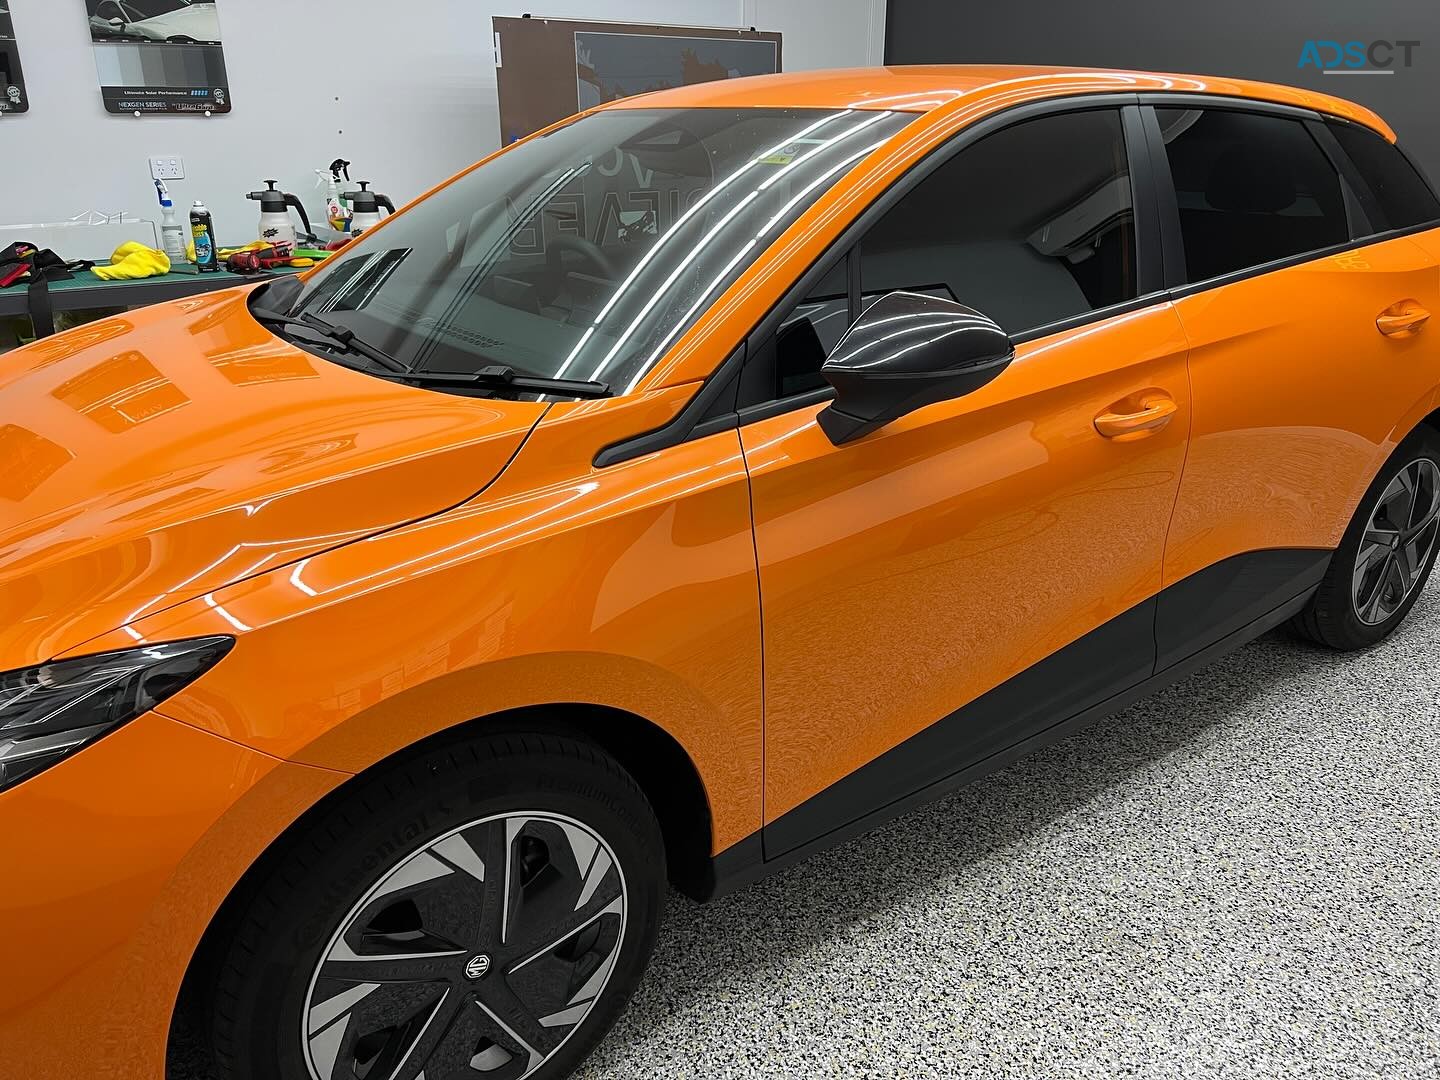 Get Translucent Tints for a Shiney Car